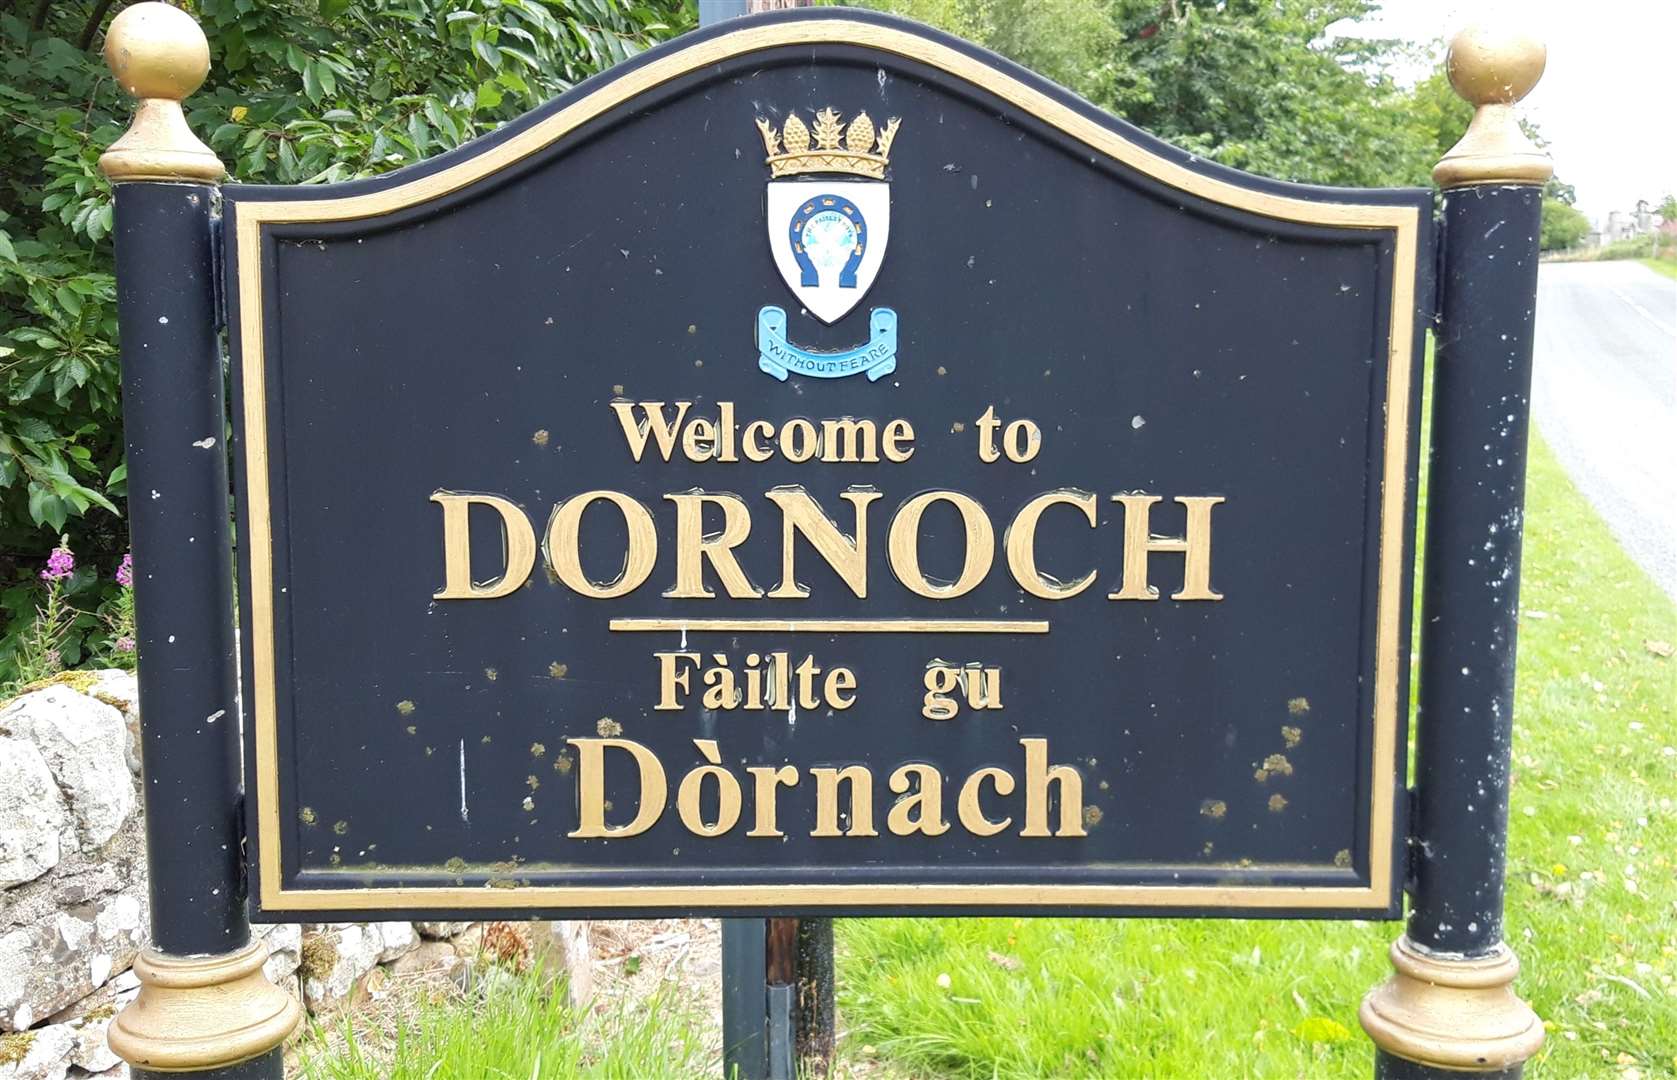 A community group in Dornoch is offering housing plots to eligible local people.